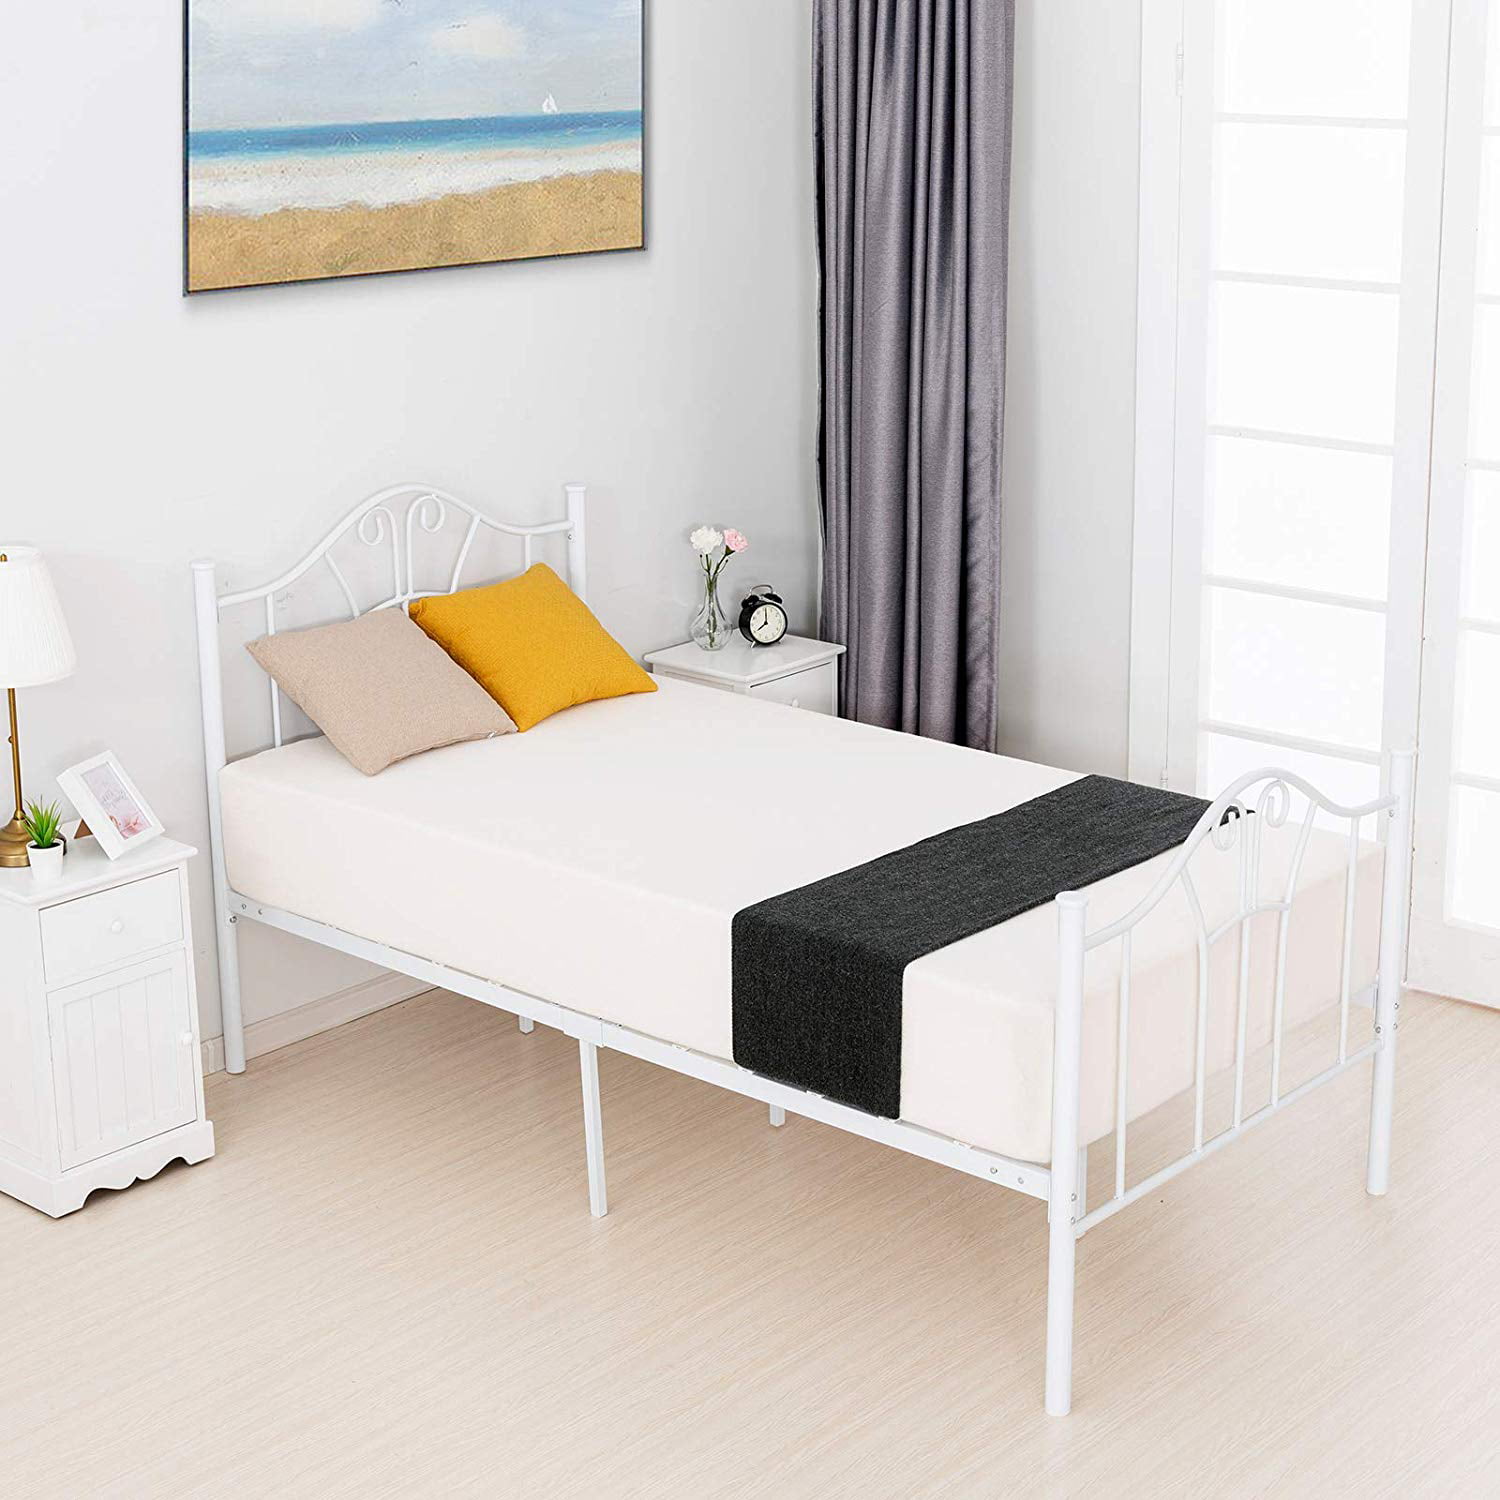 Mecor Metal Twin Xl Bed Frame Platform, Measurements Of Twin Xl Bed Frame